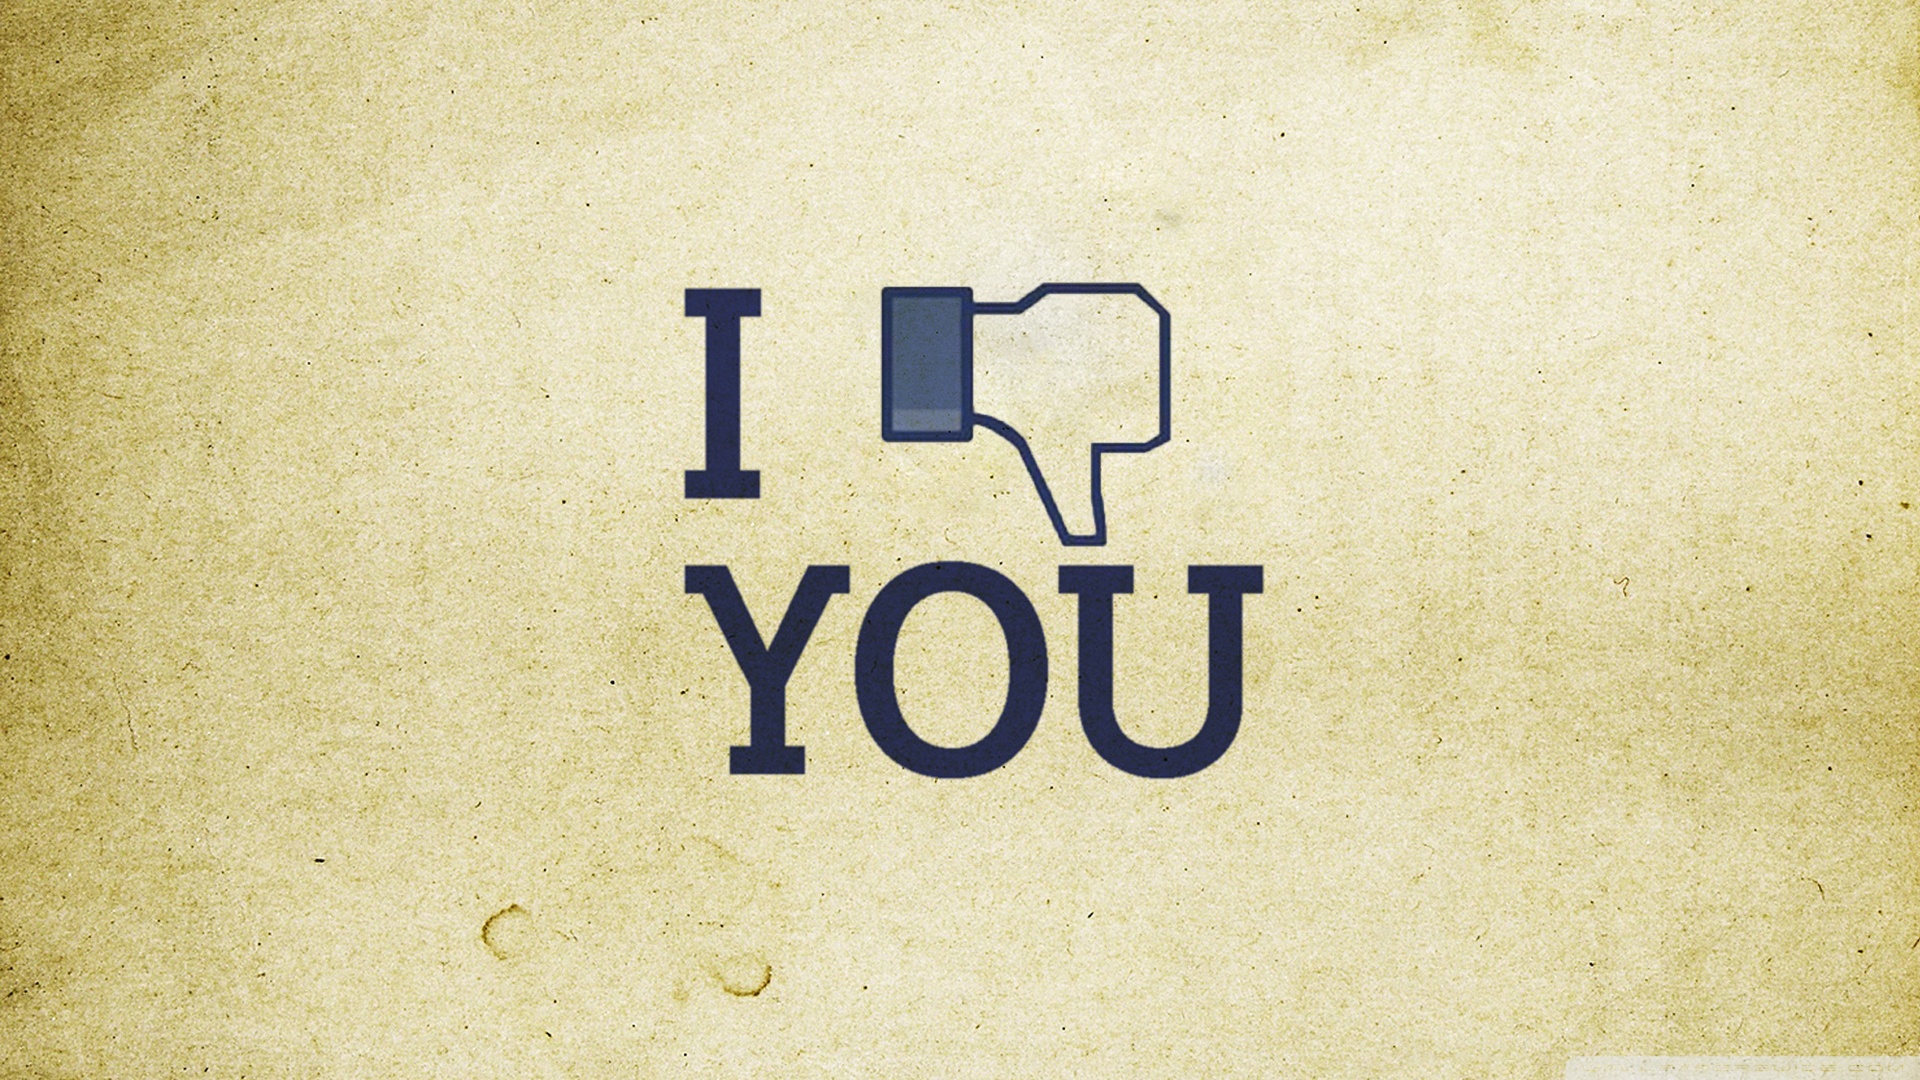 i hate you hd wallpaper,font,text,logo,graphics,brand